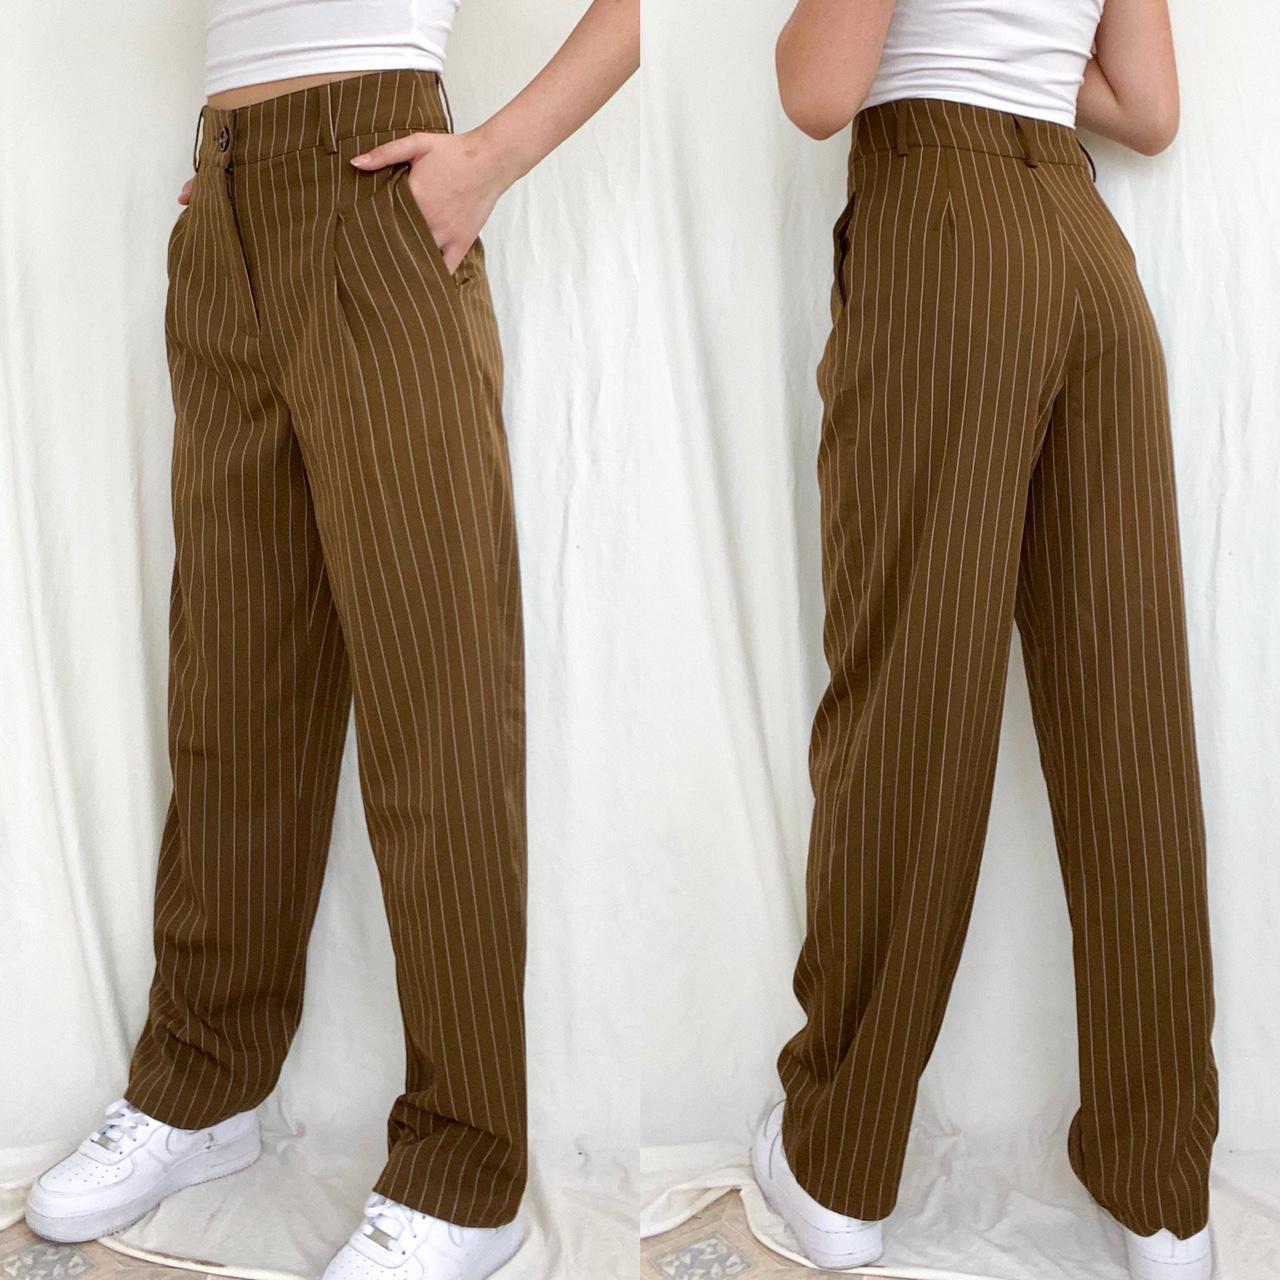 Product Image 2 - Brown Pinstripe Wide Leg Trousers

Flowy